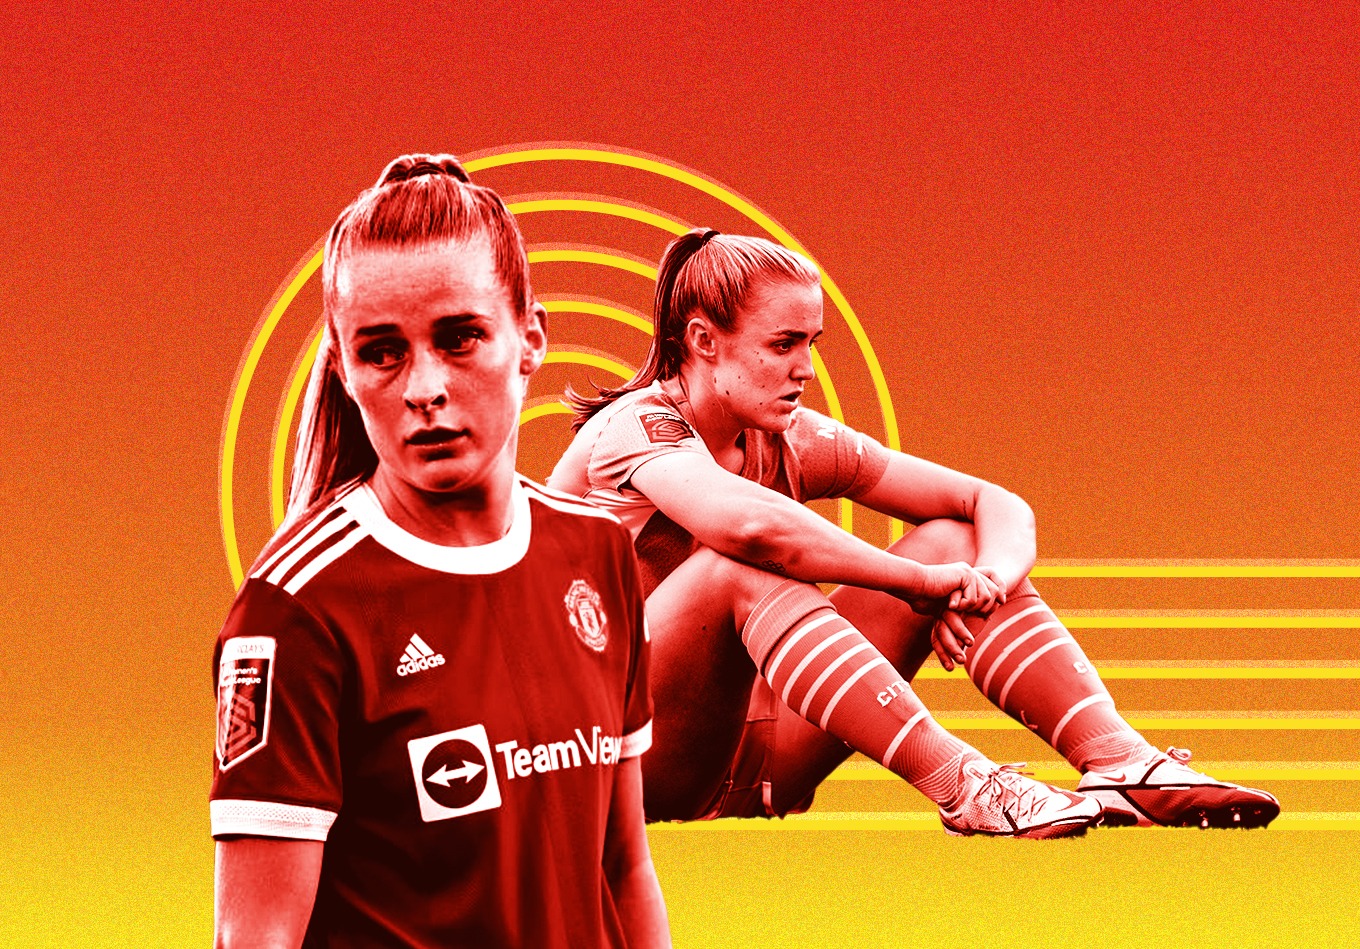 Red vs. Blue: The WSL Manchester Derby Preview